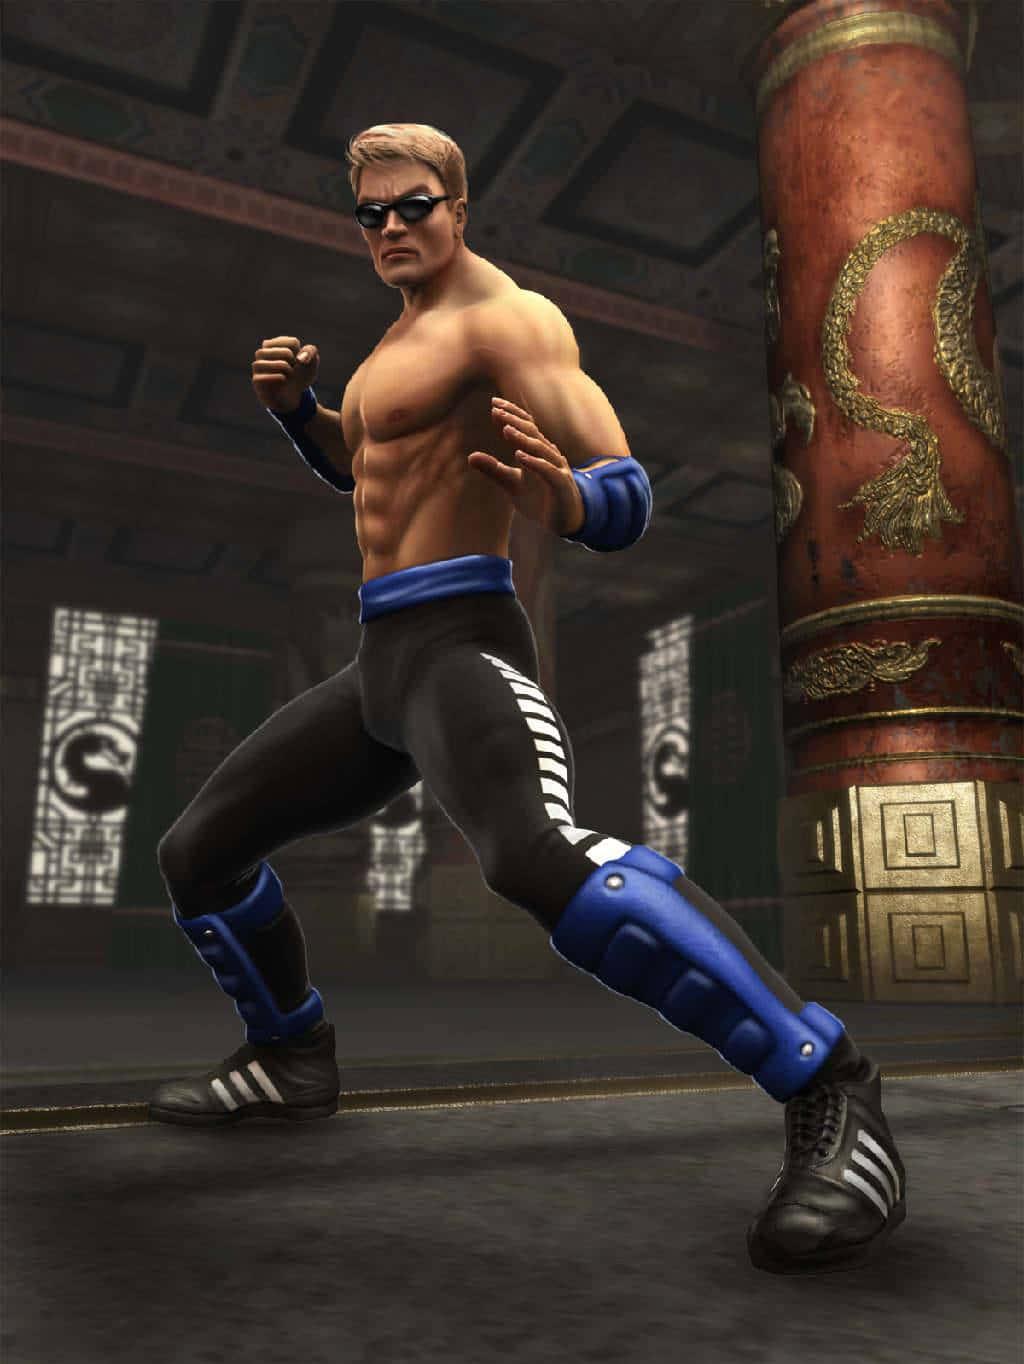 Download Johnny Cage unleashes a powerful attack in Mortal Kombat